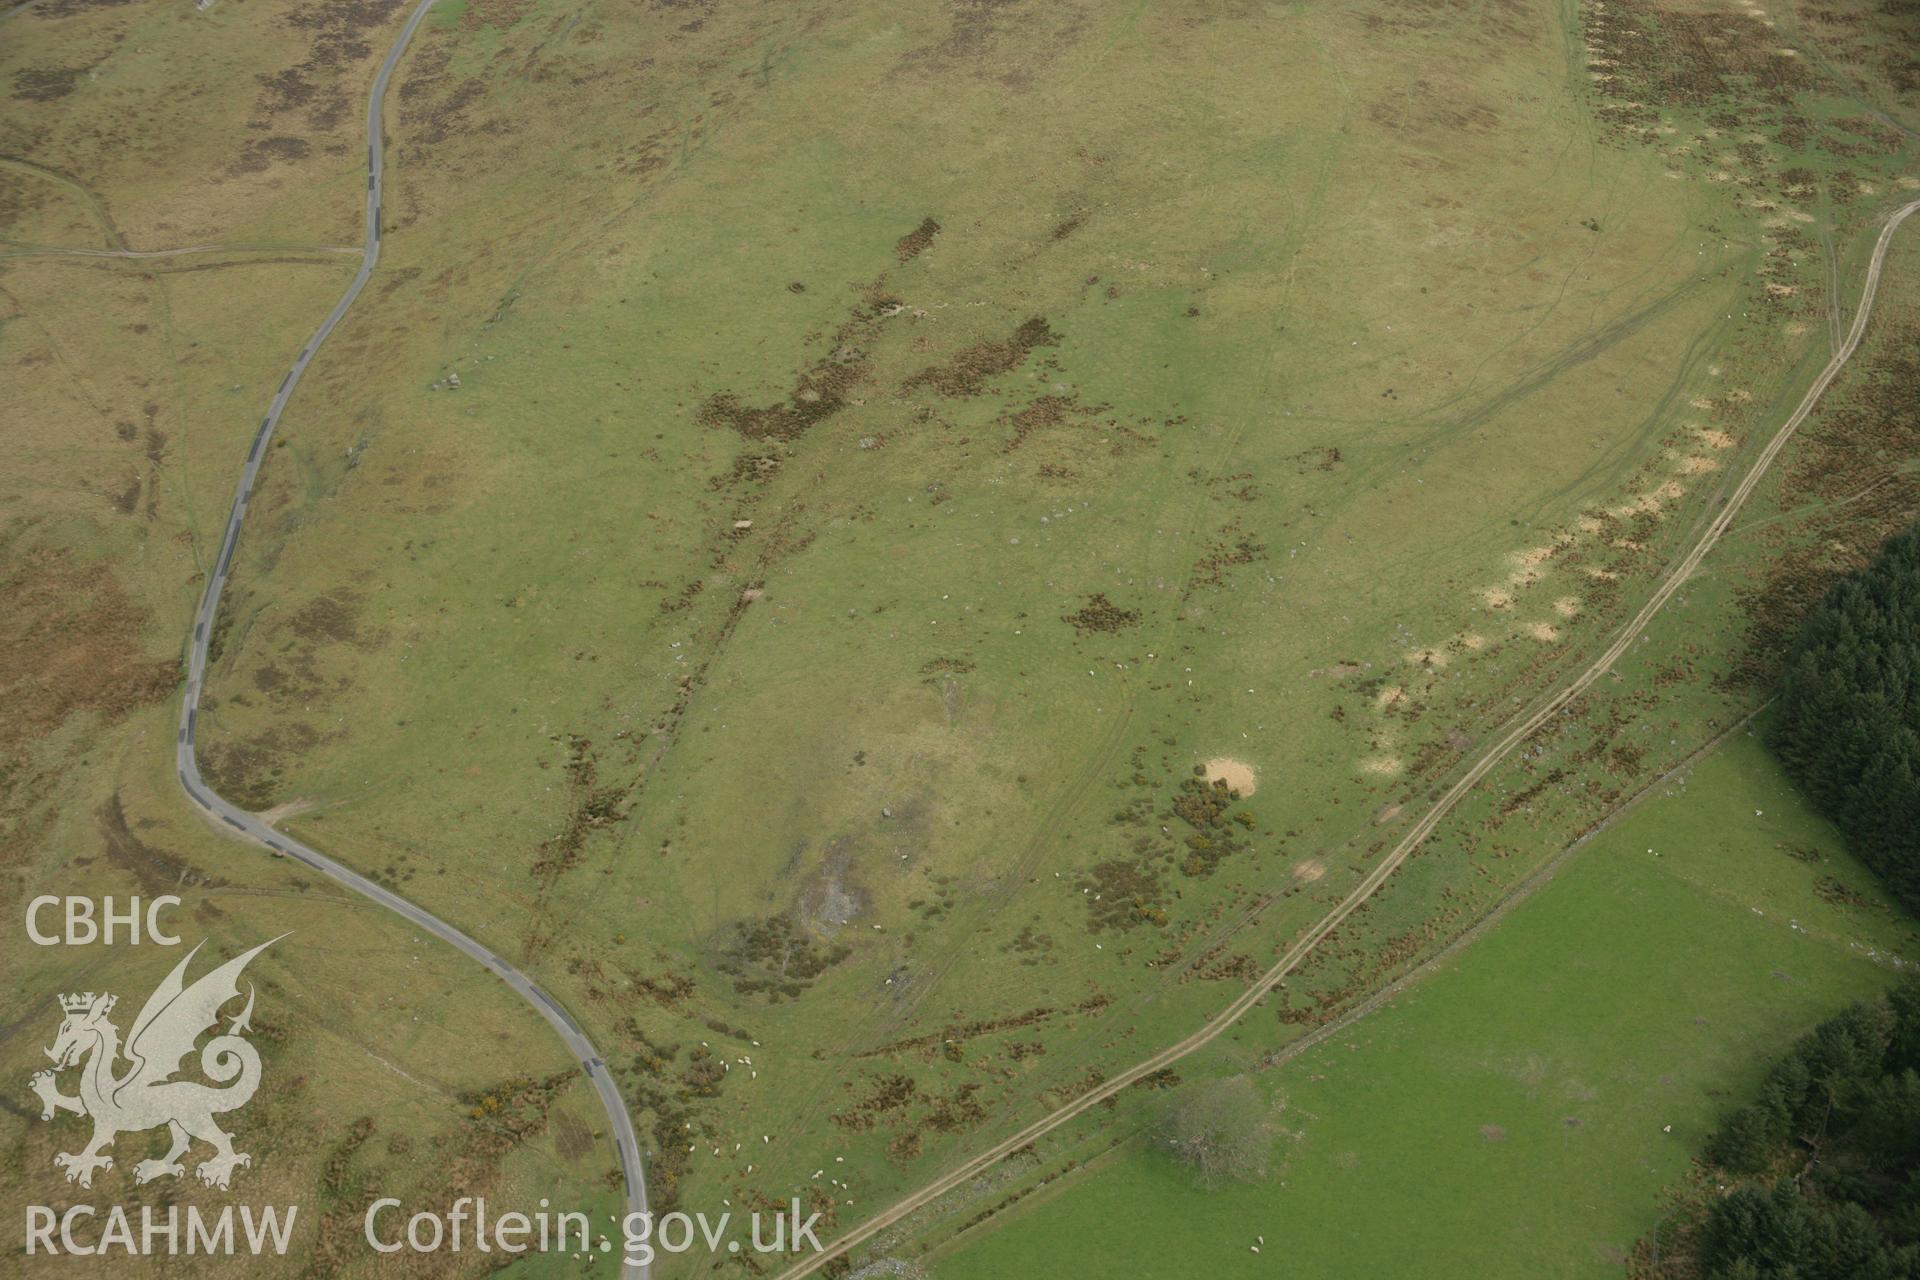 RCAHMW colour oblique aerial photograph of Hafod Ithel Cairnfield. Taken on 17 April 2007 by Toby Driver